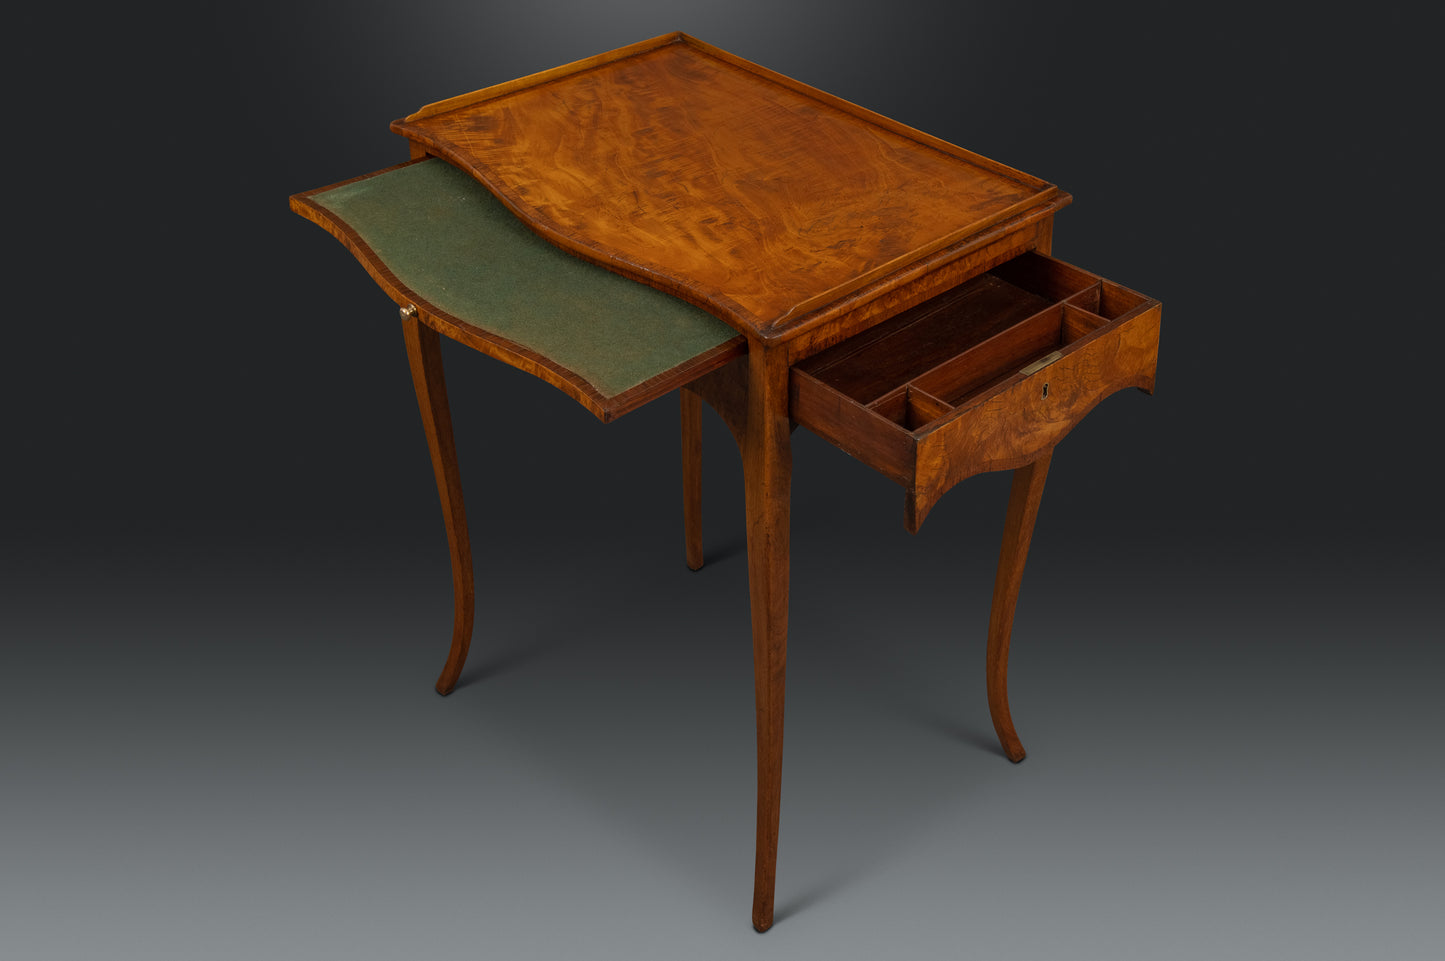 Lady's Writing Table in the Manner of Mayhew and Ince circa 1785